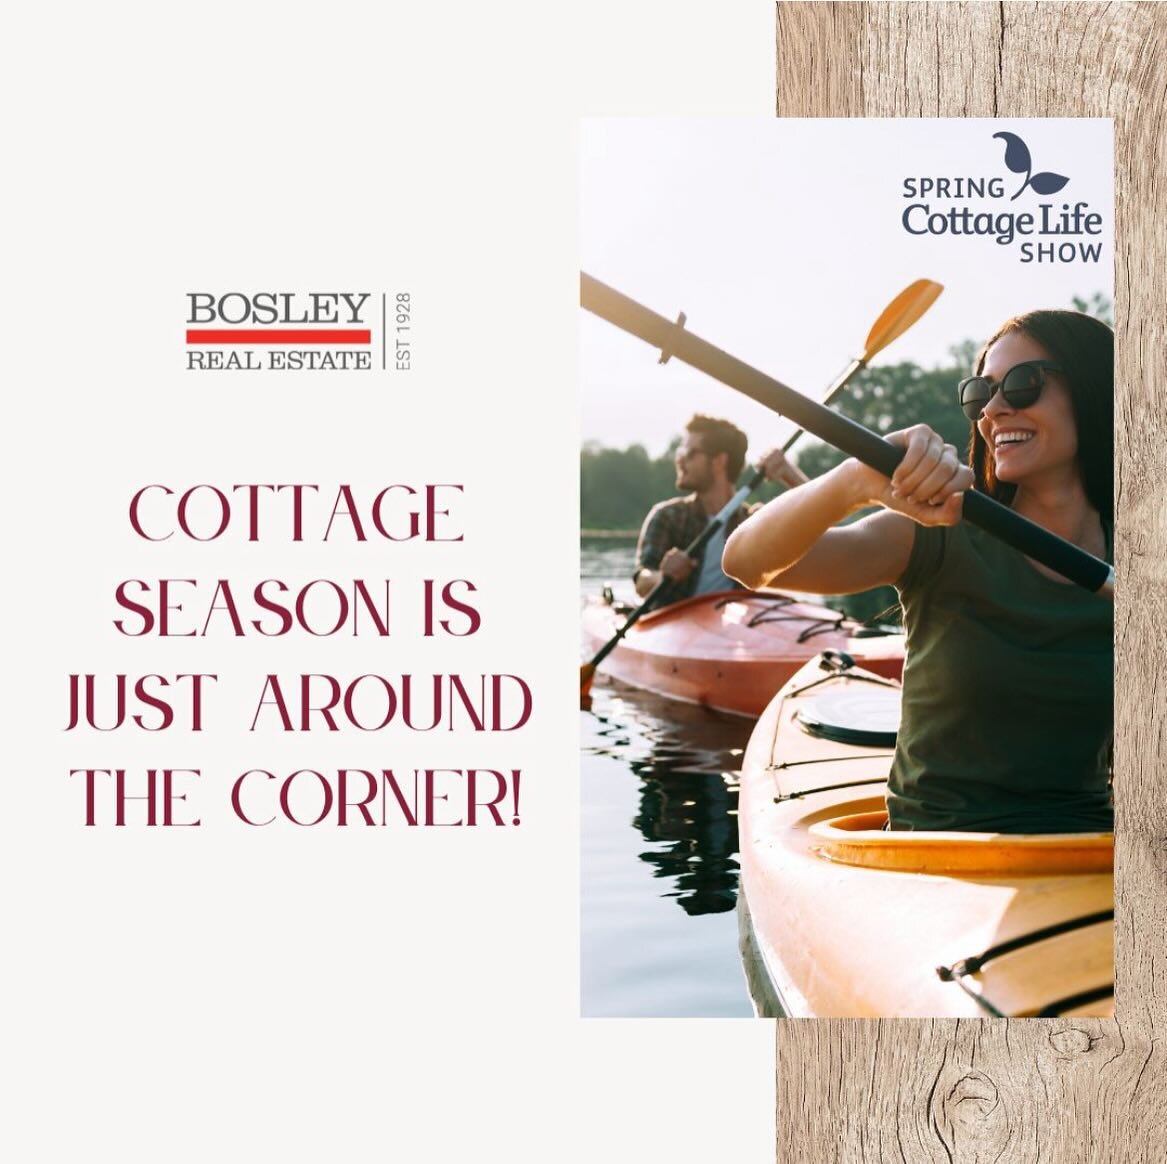 Are you ready for cottage season? 

Get excited because it&rsquo;s just around the corner! I&rsquo;m thrilled to announce that I will be representing Bosley Real Estate and showcasing at the Spring Cottage Life Show, taking place at The International